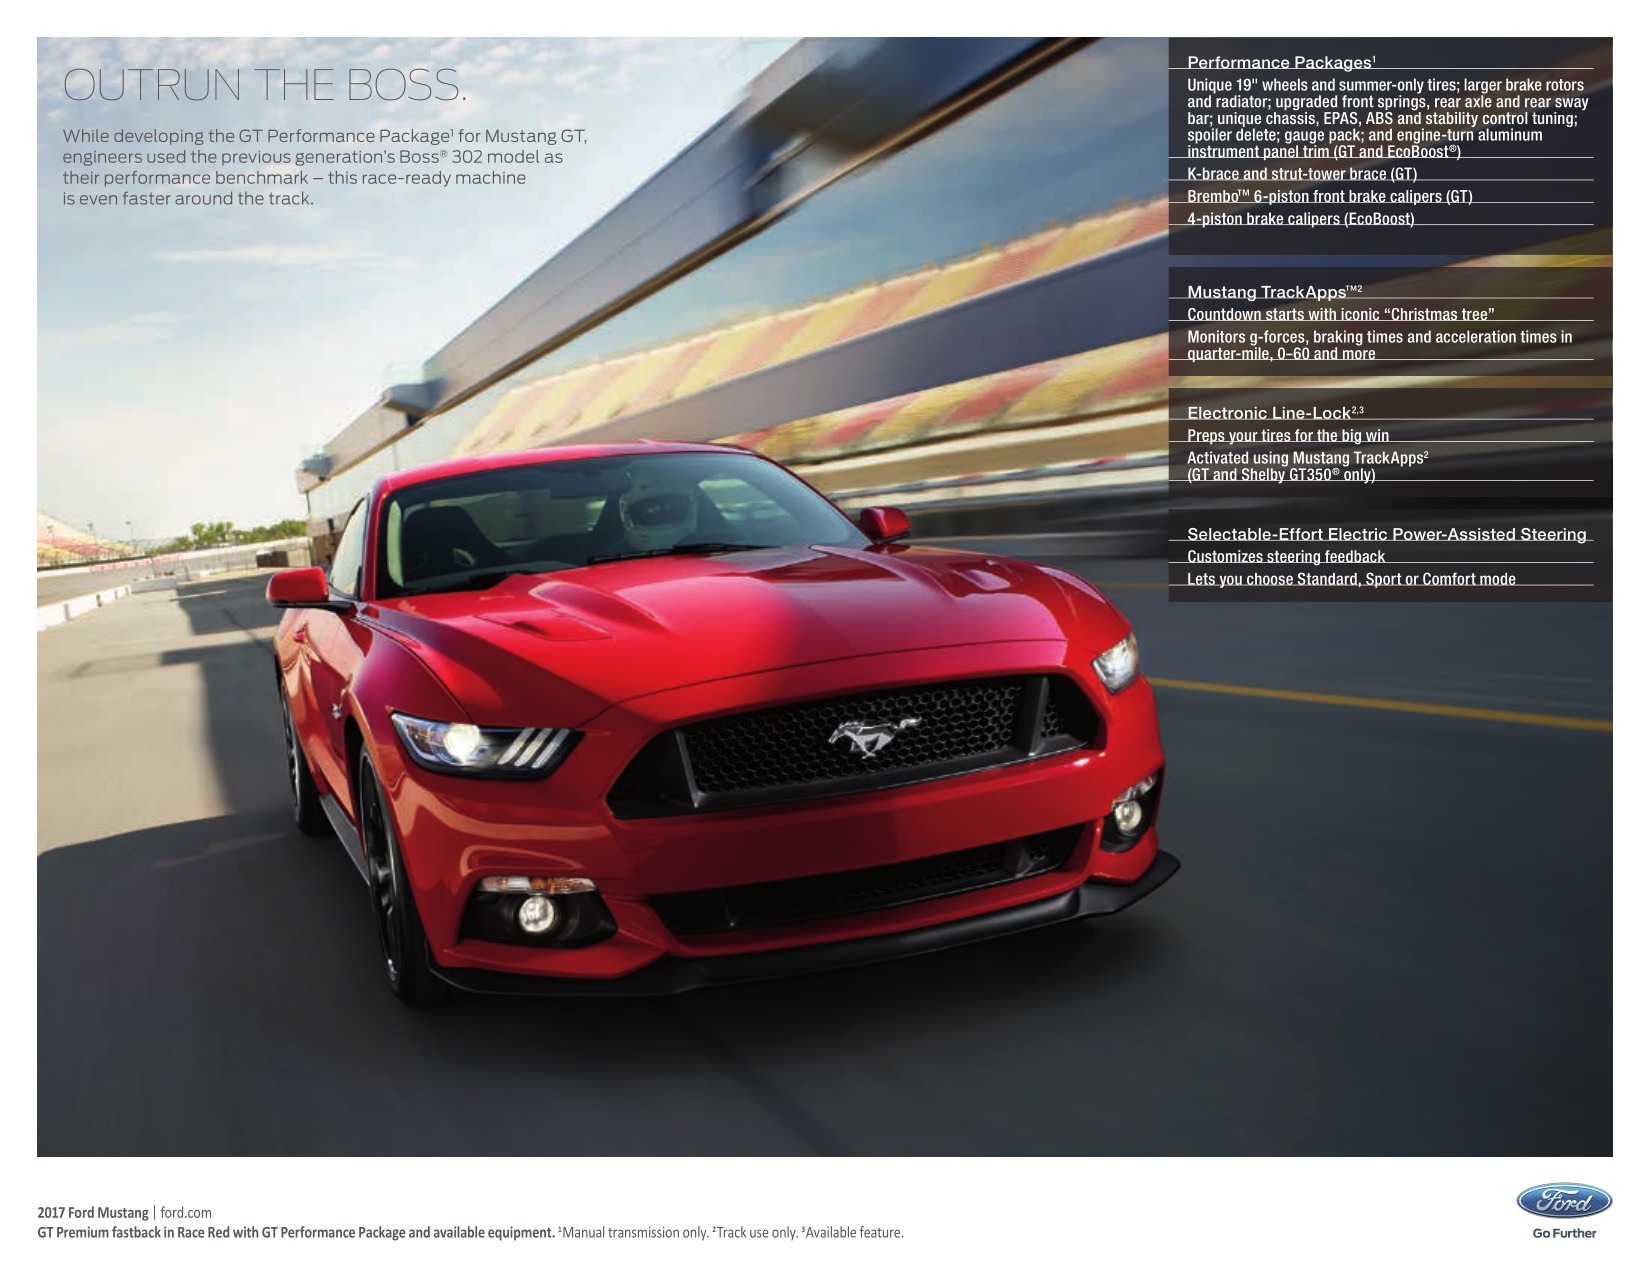 2017 Ford Mustang Brochure Page 14